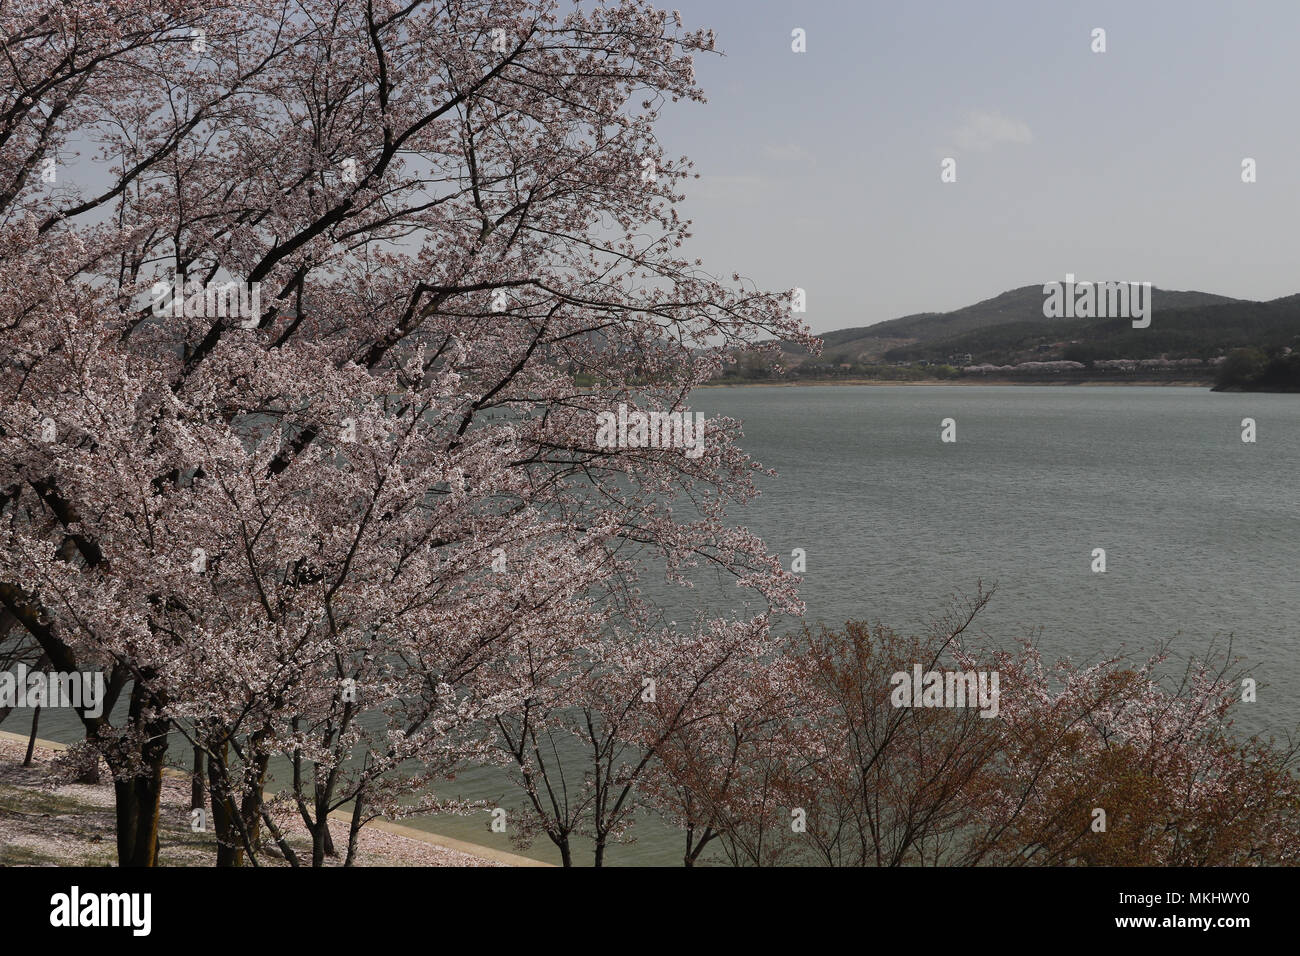 View across Lake Bomun in Gyeongju, South Korea, during peak cherry blossom season. Pink cherry trees, blue lake, distant mountains, and copy space. Stock Photo